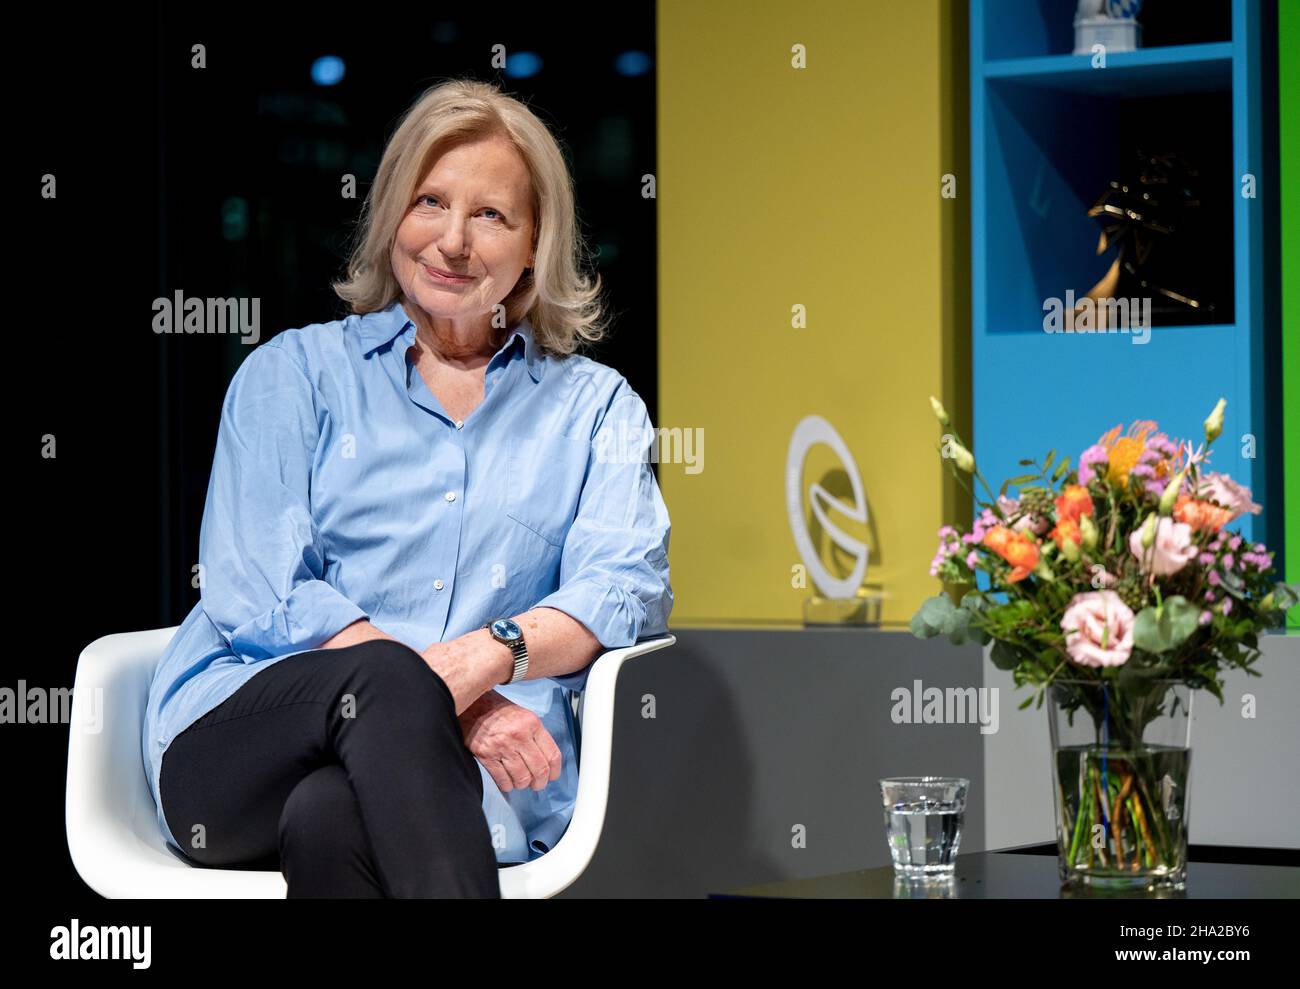 Berlin, Germany. 09th Dec, 2021. Maren Kroymann, actress and comedienne, recorded during the programme 'Fernsehsalon' at the Deutsche Kinemathek - Museum für Film und Fernsehen. Kroymann is the inaugural guest of the new format 'Fernsehsalon', which can be seen online from 13.01.2022 on the website of the Kinemathek, on the Berlin channel Alex and on other platforms. Credit: Monika Skolimowska/dpa-Zentralbild/dpa/Alamy Live News Stock Photo